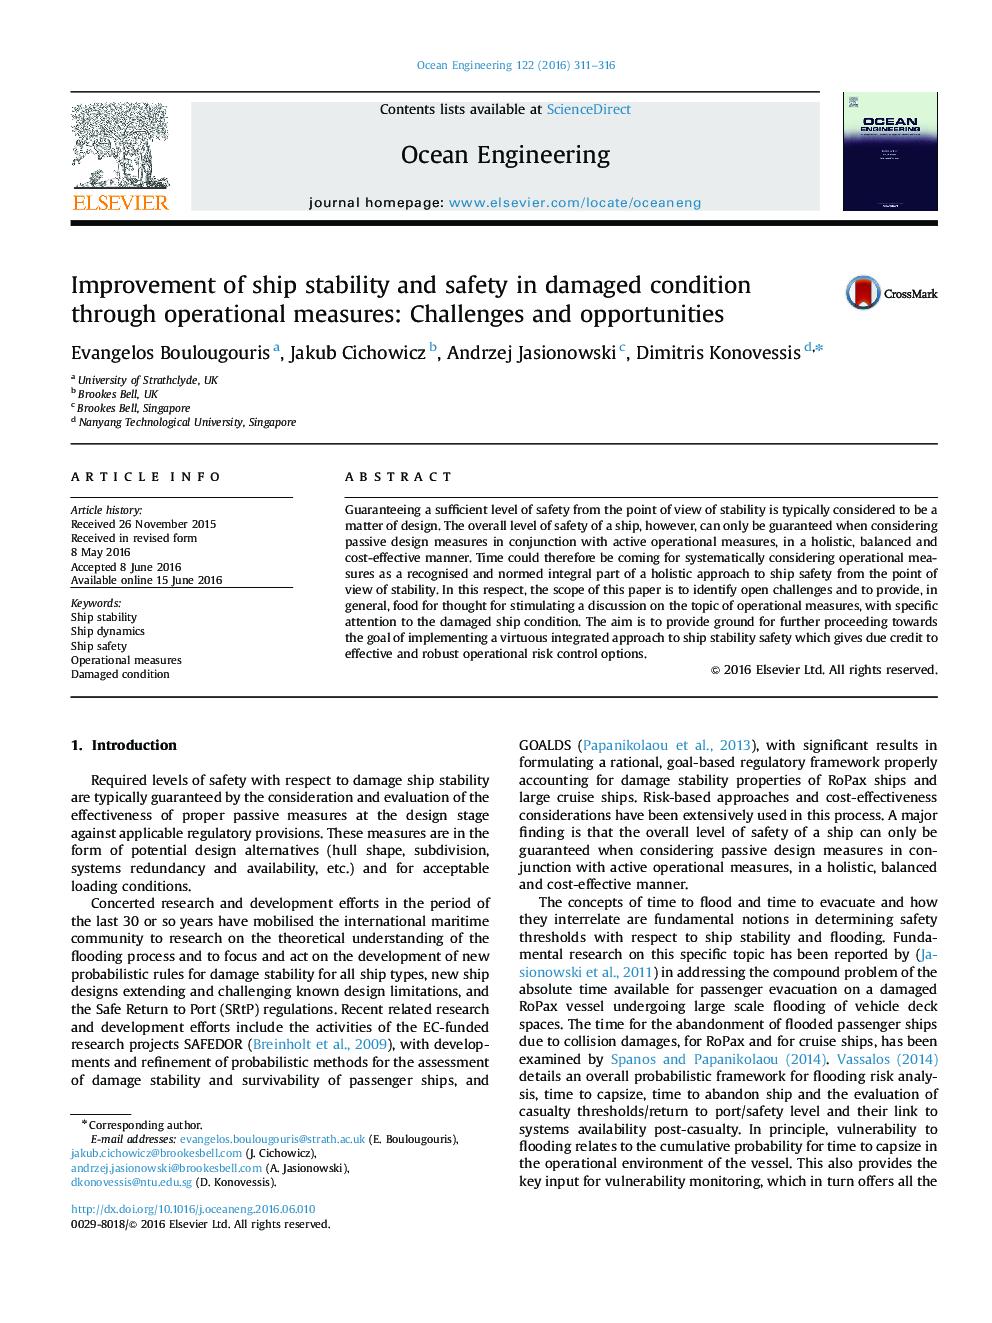 Improvement of ship stability and safety in damaged condition through operational measures: Challenges and opportunities